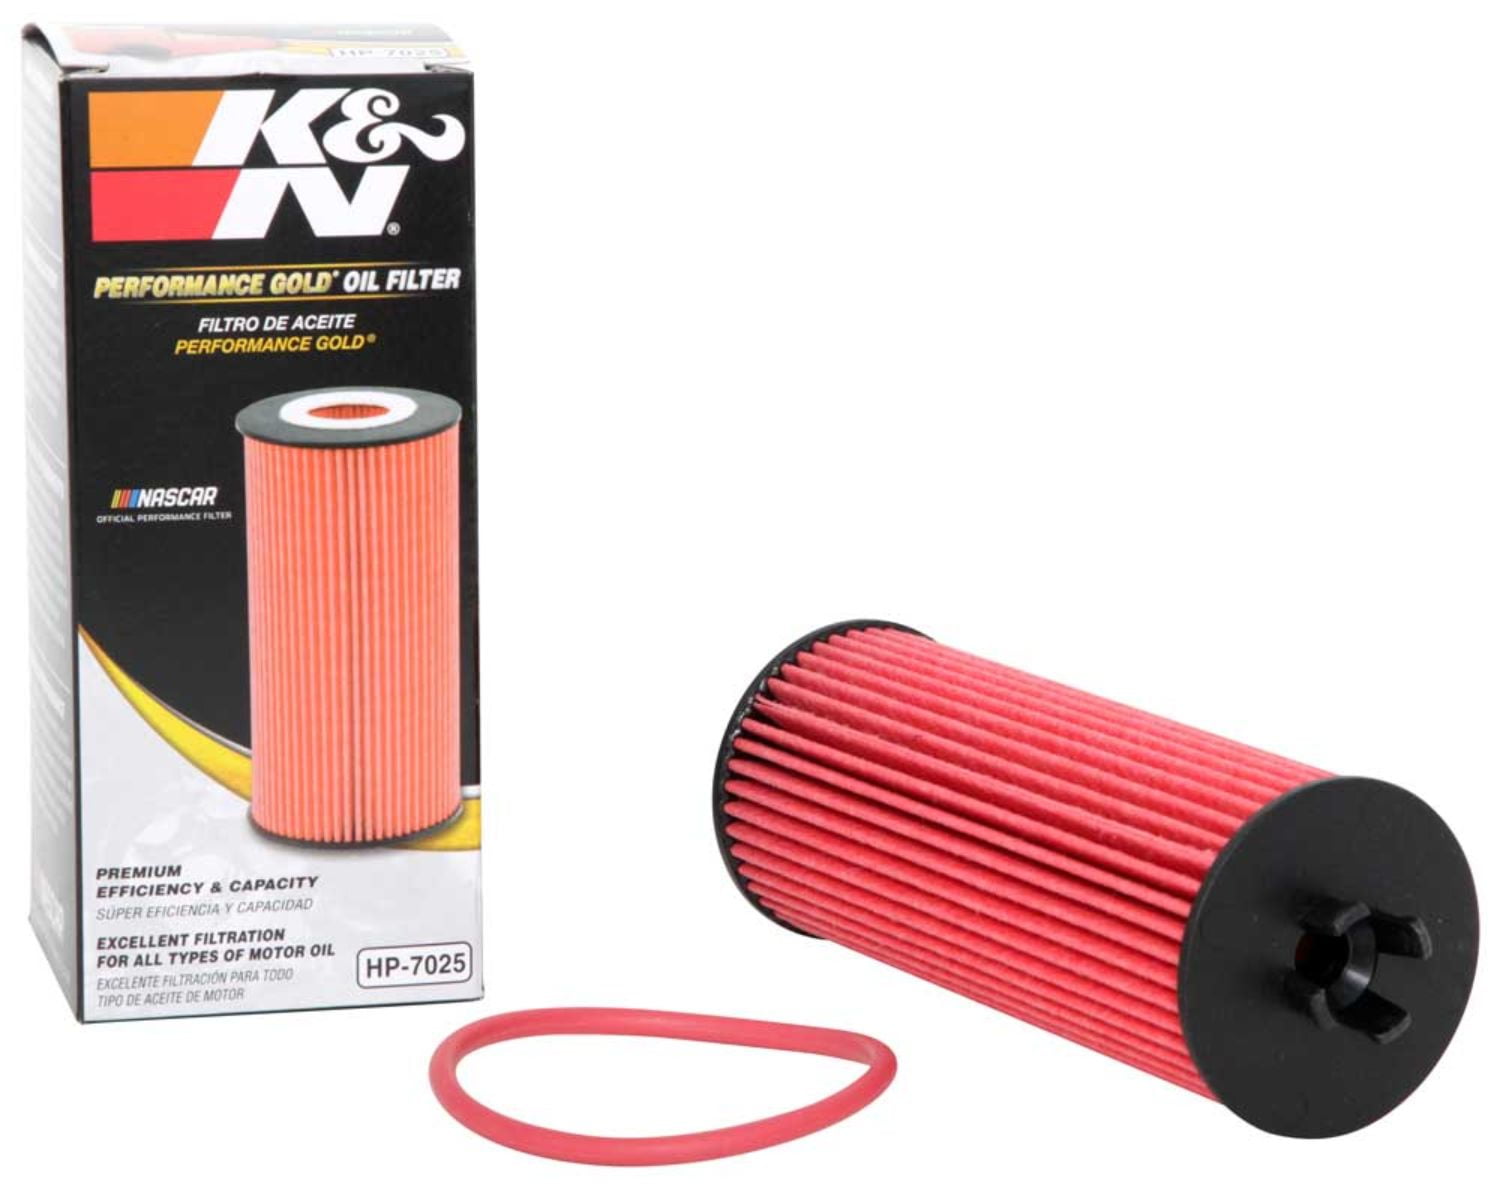 K&N Premium Oil Filter: Protects your Engine: Compatible with Select CHRYSLER/DODGE/JEEP/RAM Vehicle Models HP-7025 See Product Description for Full List of Compatible Vehicles 